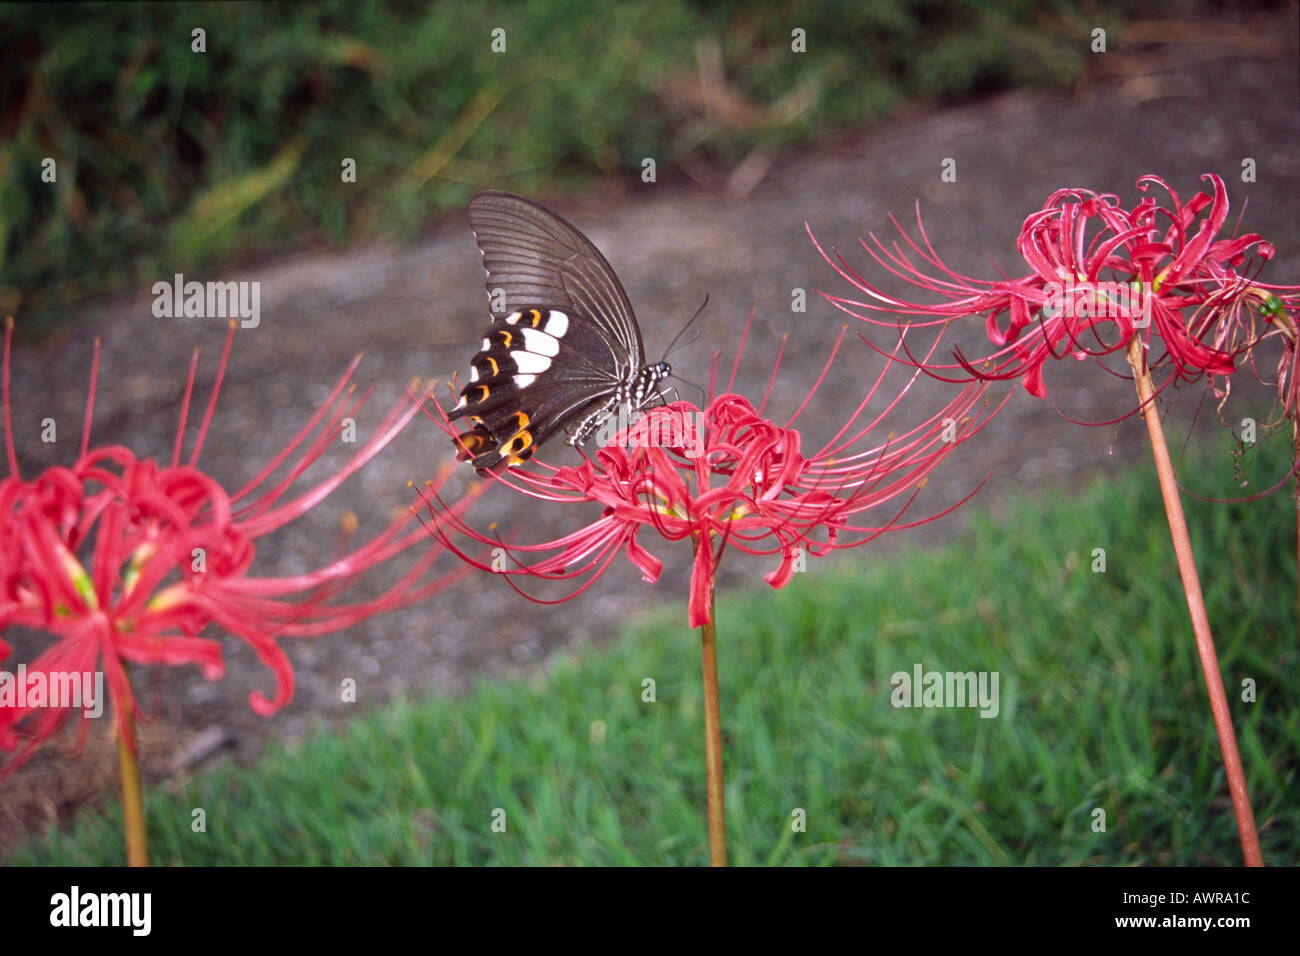 Butterfly on autumnal equinox flower. Japan. Stock Photo